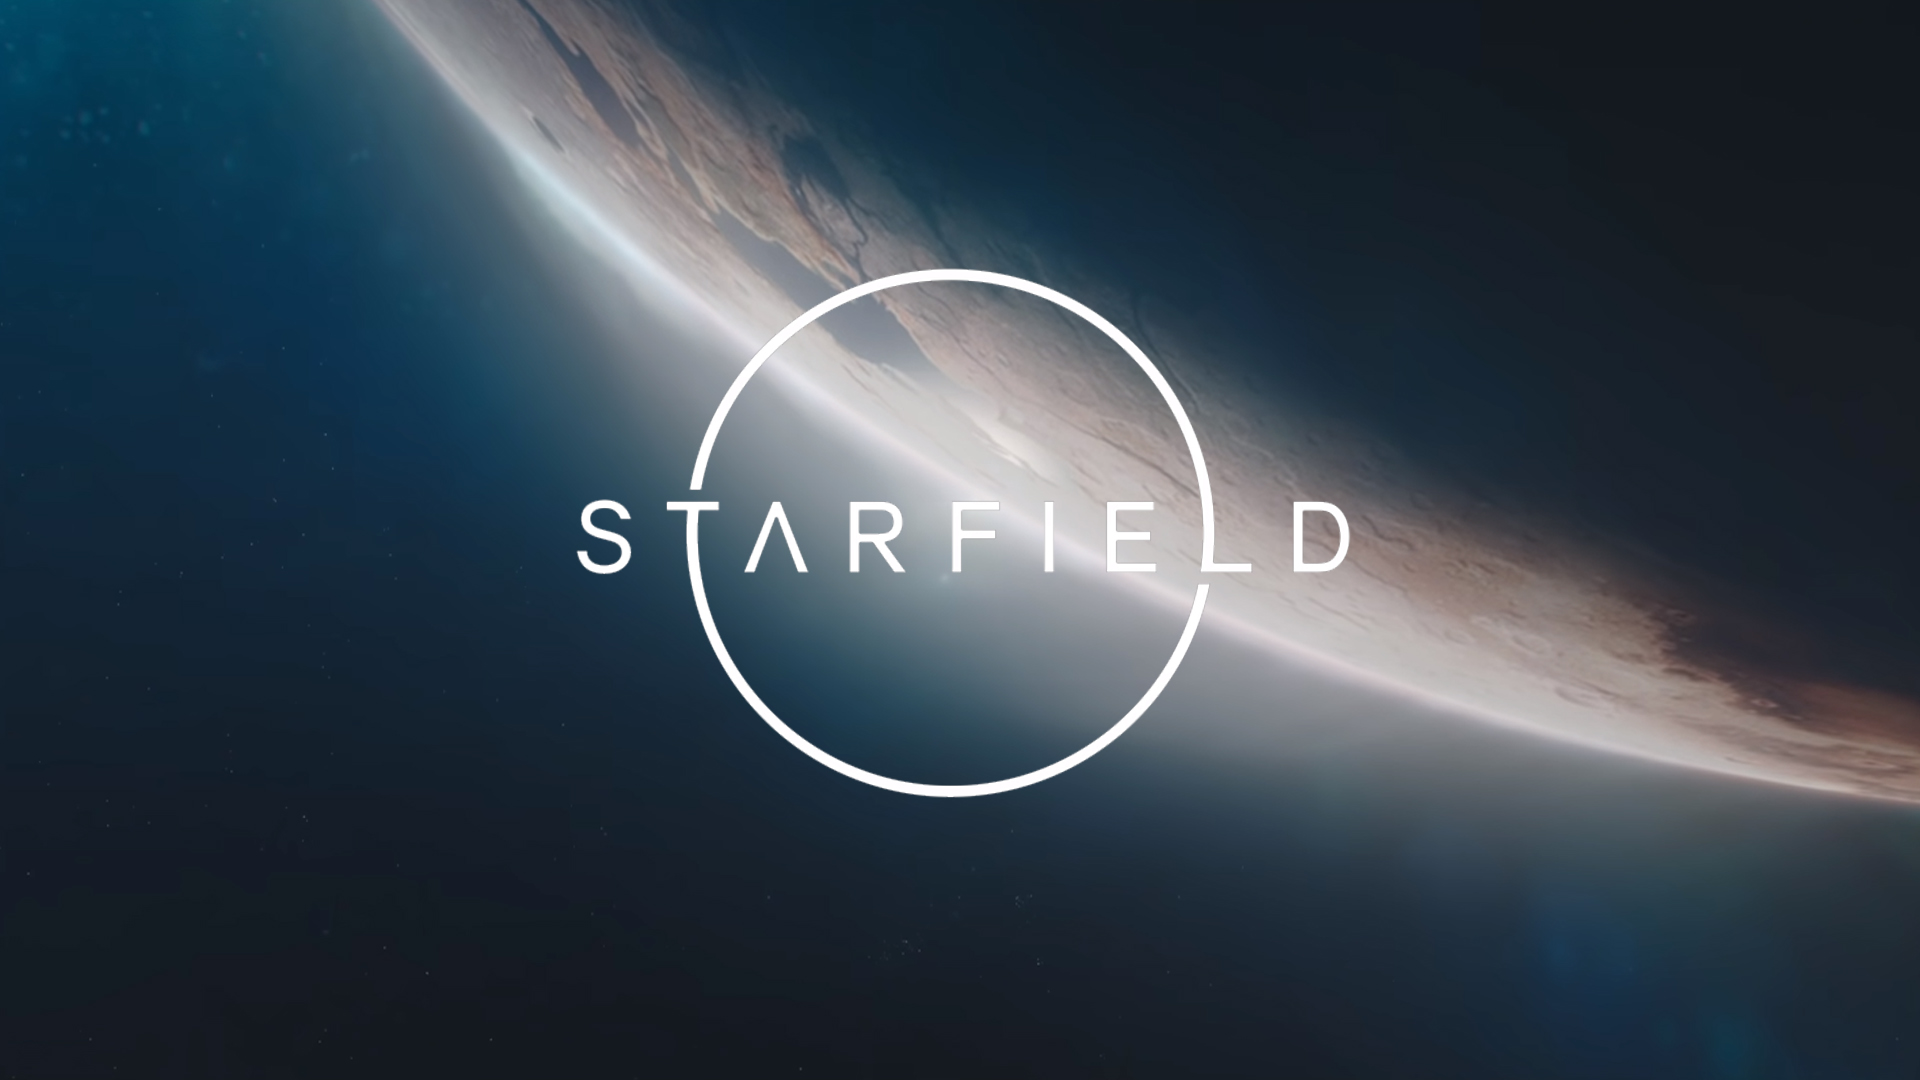 Microsoft stakes Xbox video game sales on long-awaited space adventure  Starfield